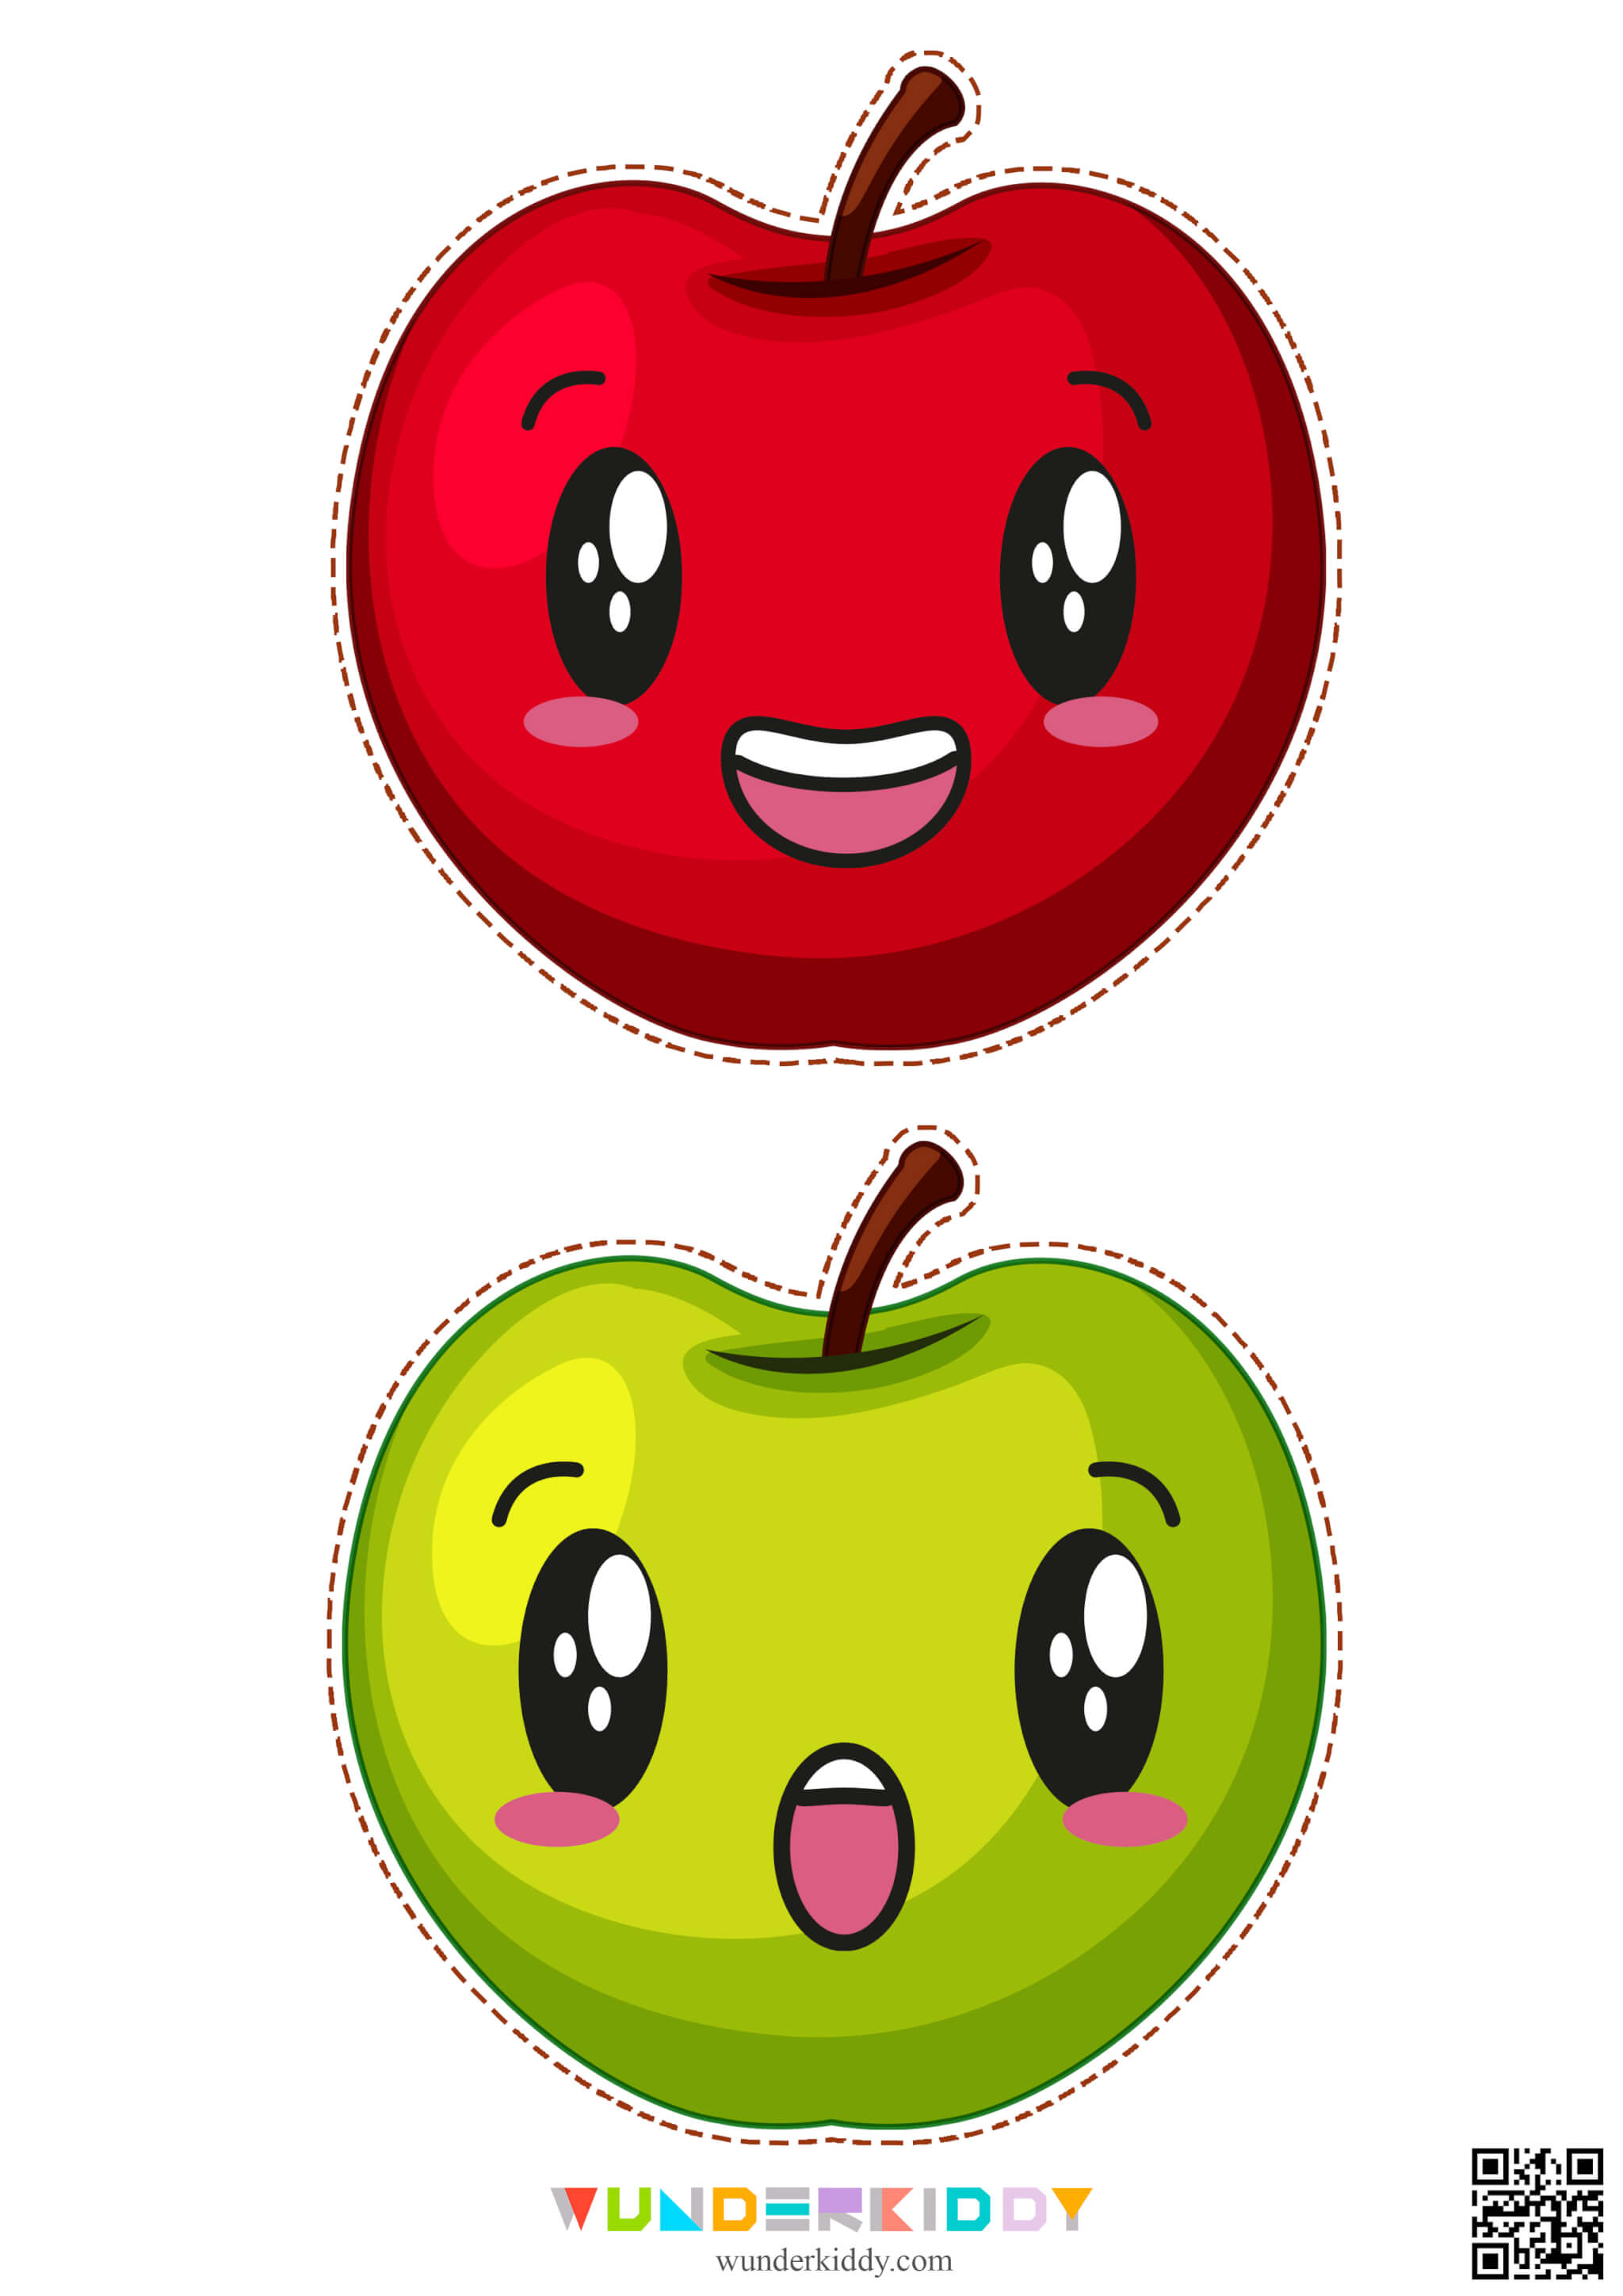 Template «Apples» - Image 4